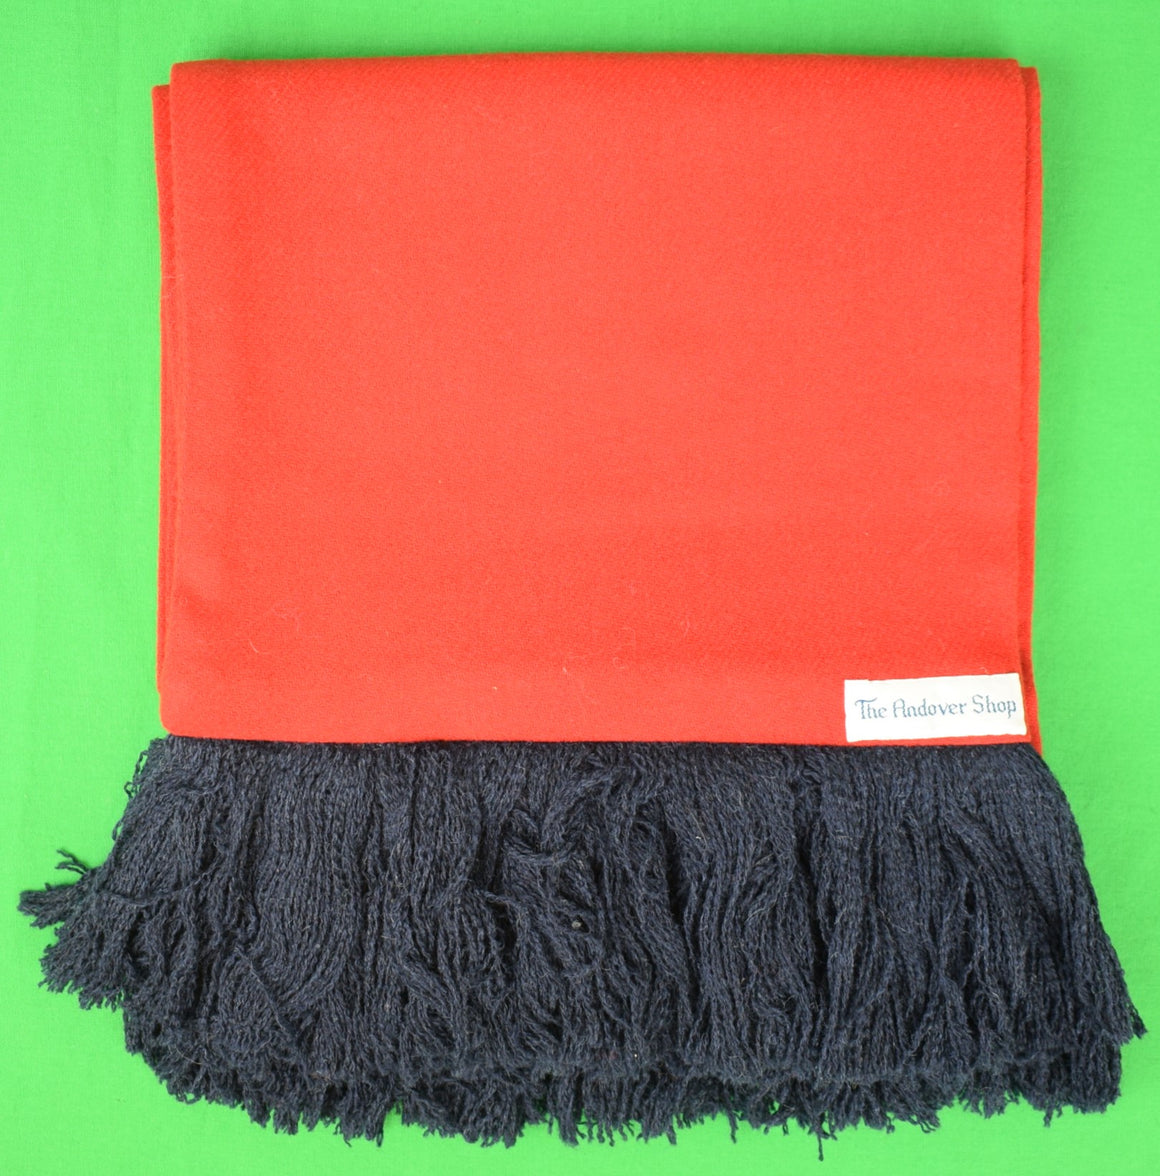 "The Andover Shop Red Wool Scarf w/ Navy Fringe"